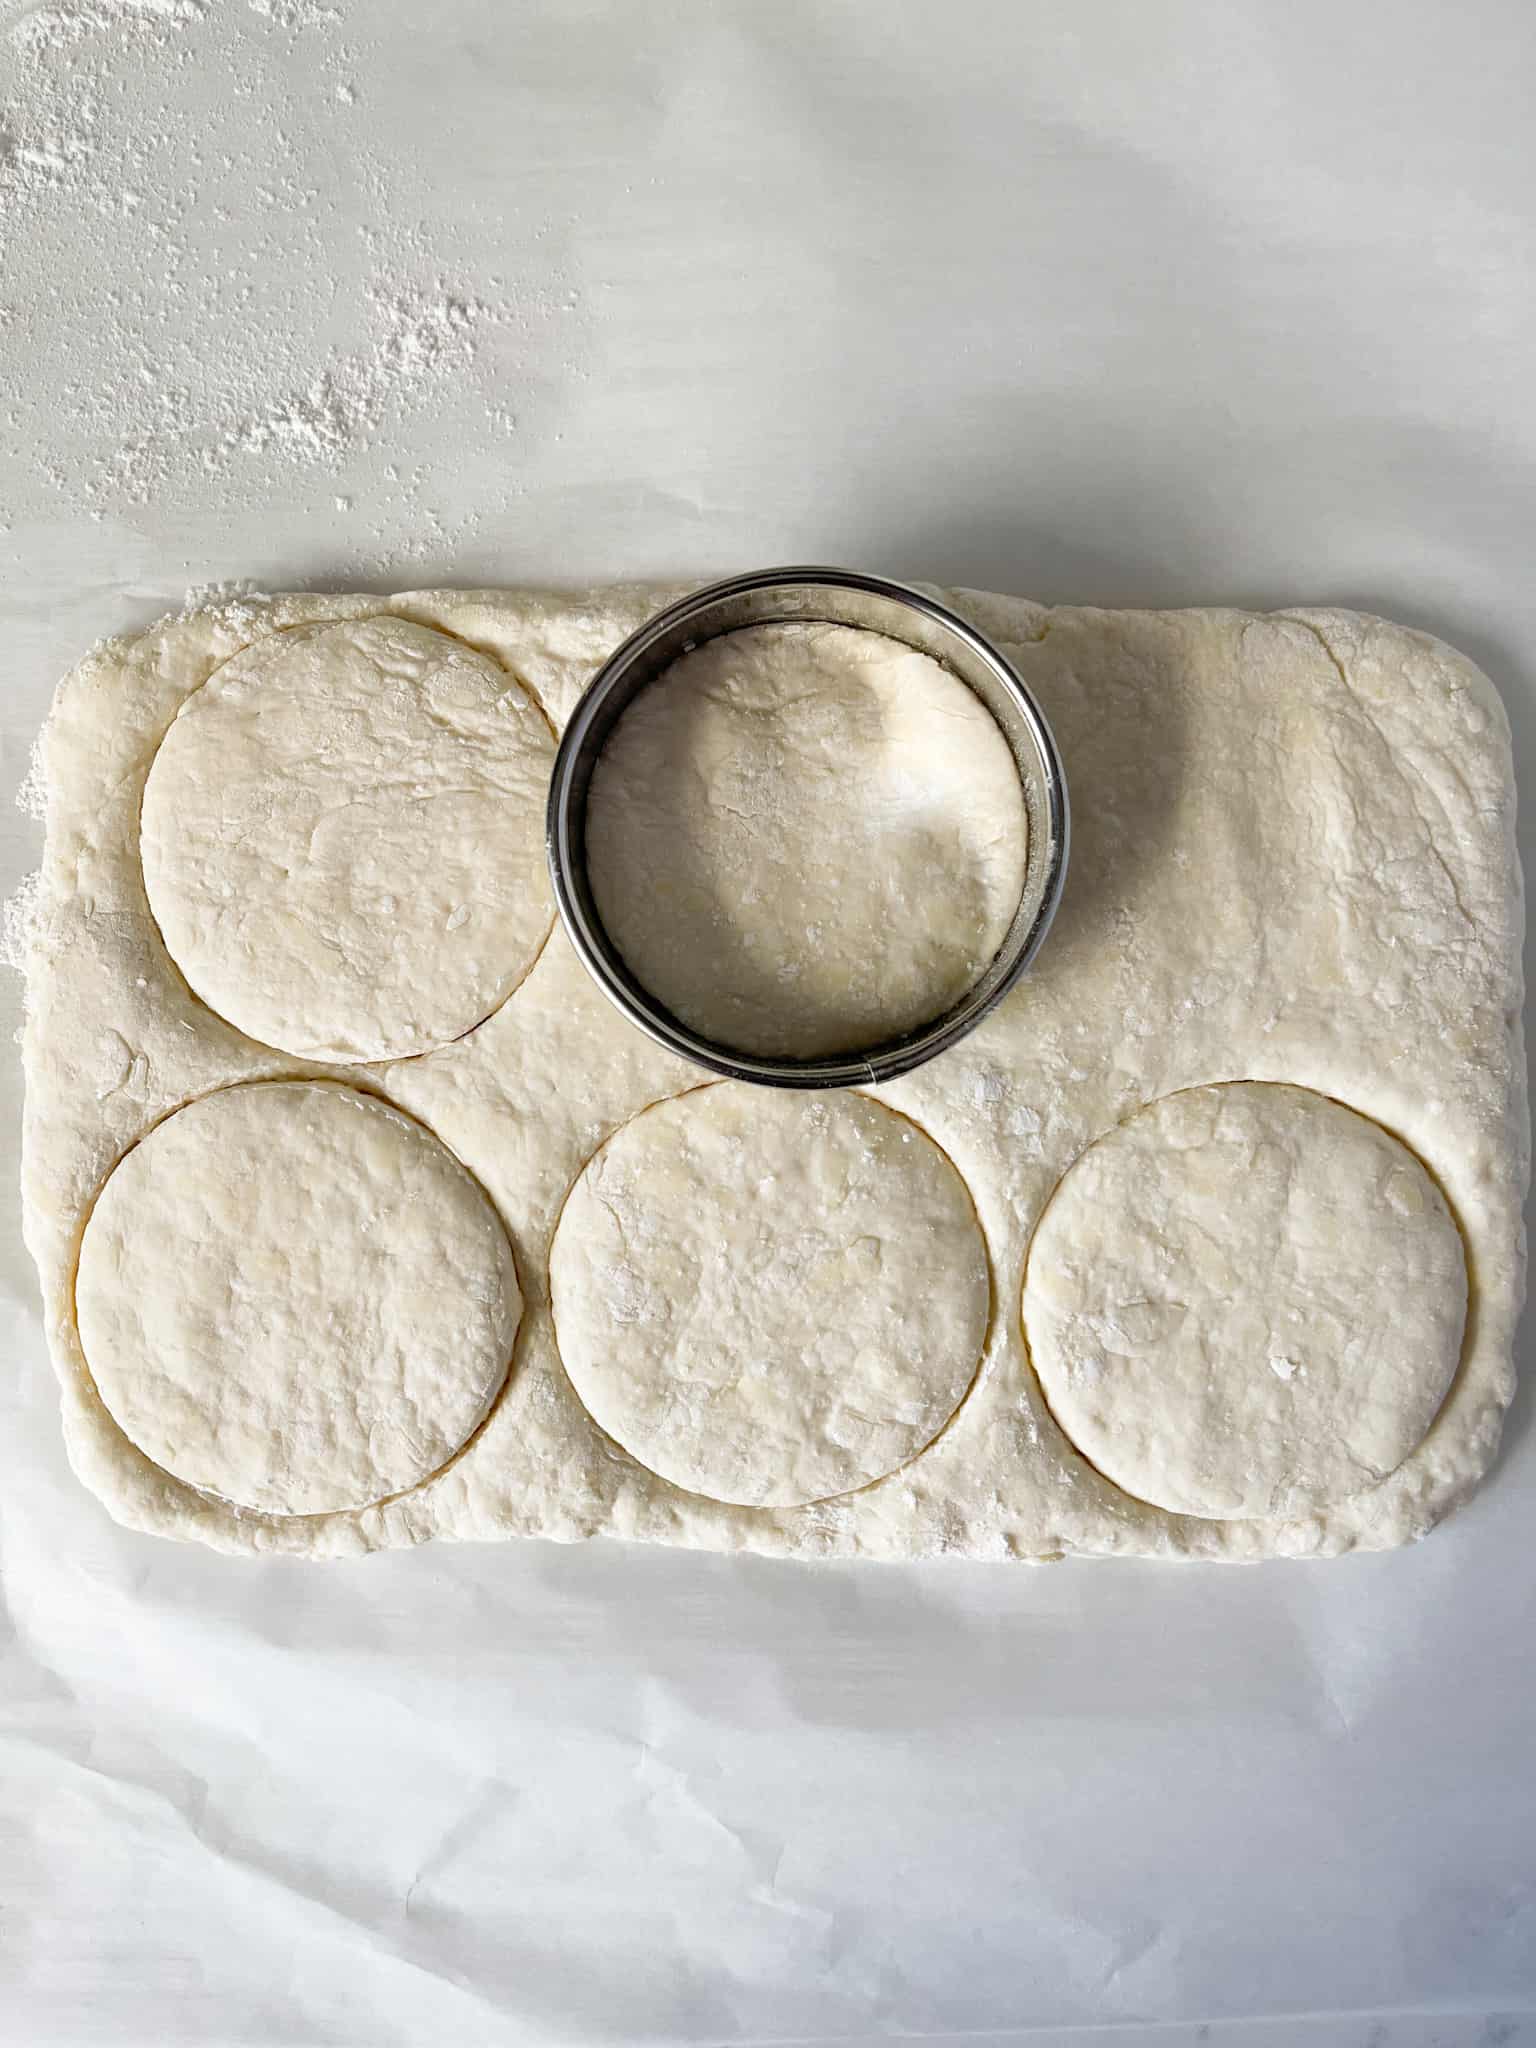 Buttermilk biscuits with biscuit cutter